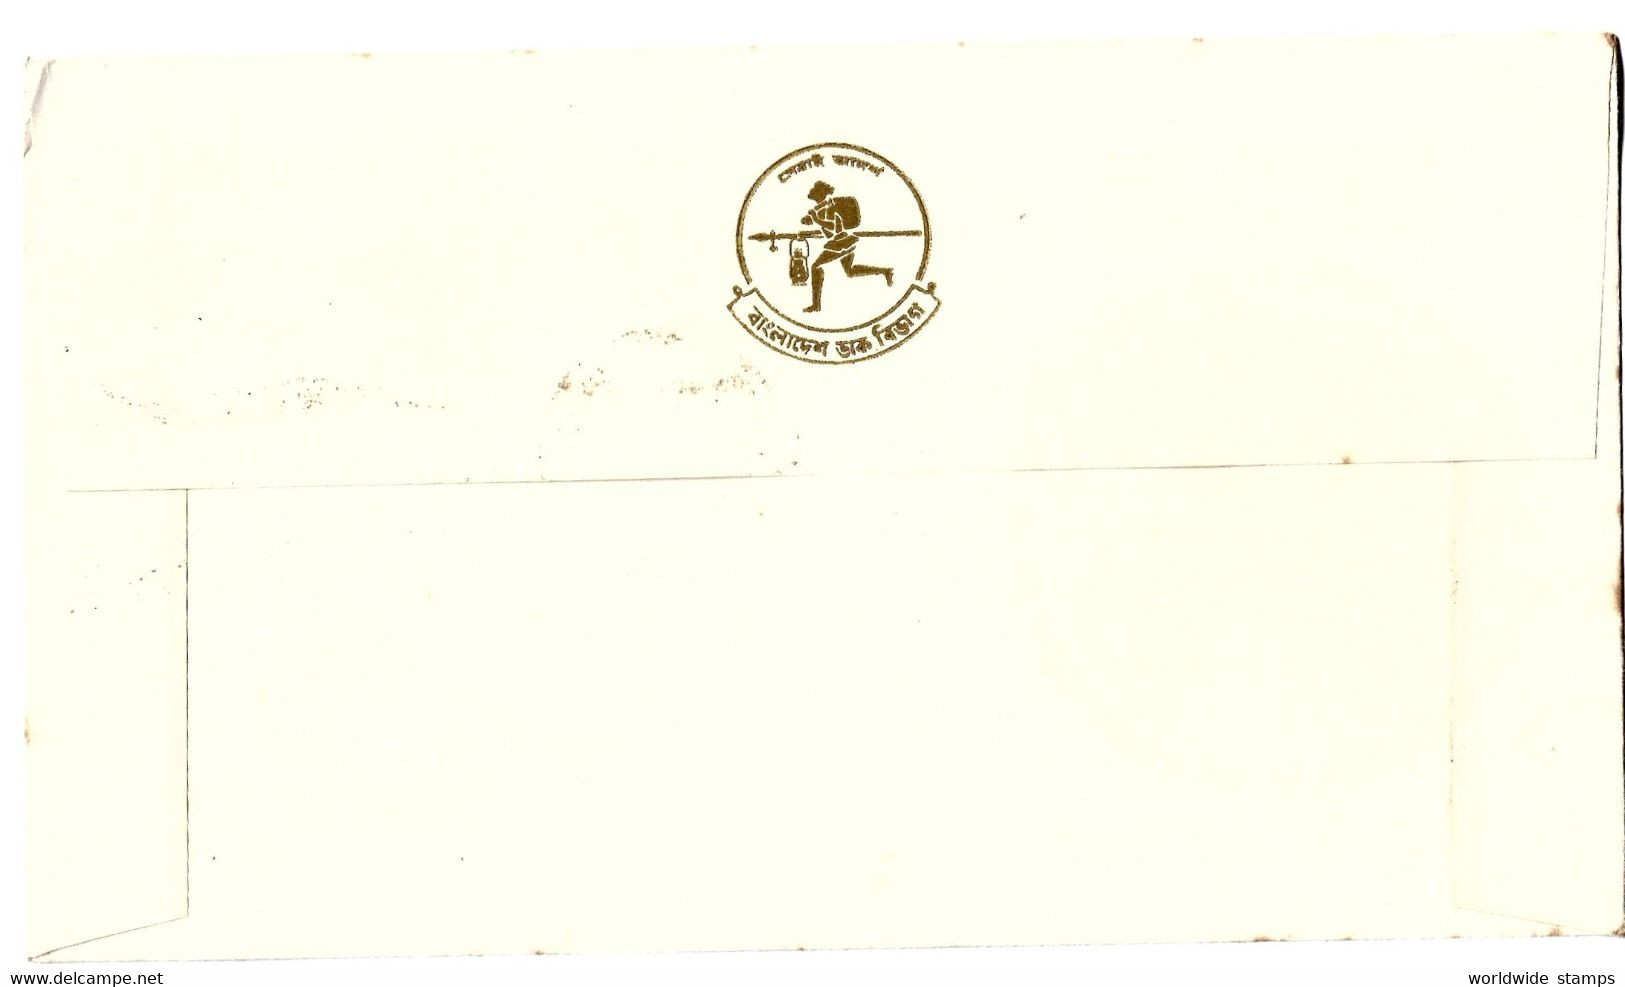 BANGLADESH 1974 FDC FIRST POPULATION CENSUS, MAN, WOMAN, CHILD, GIRL, BOY, FAMILY, MAP, FIRST DAY COVER - Bangladesh